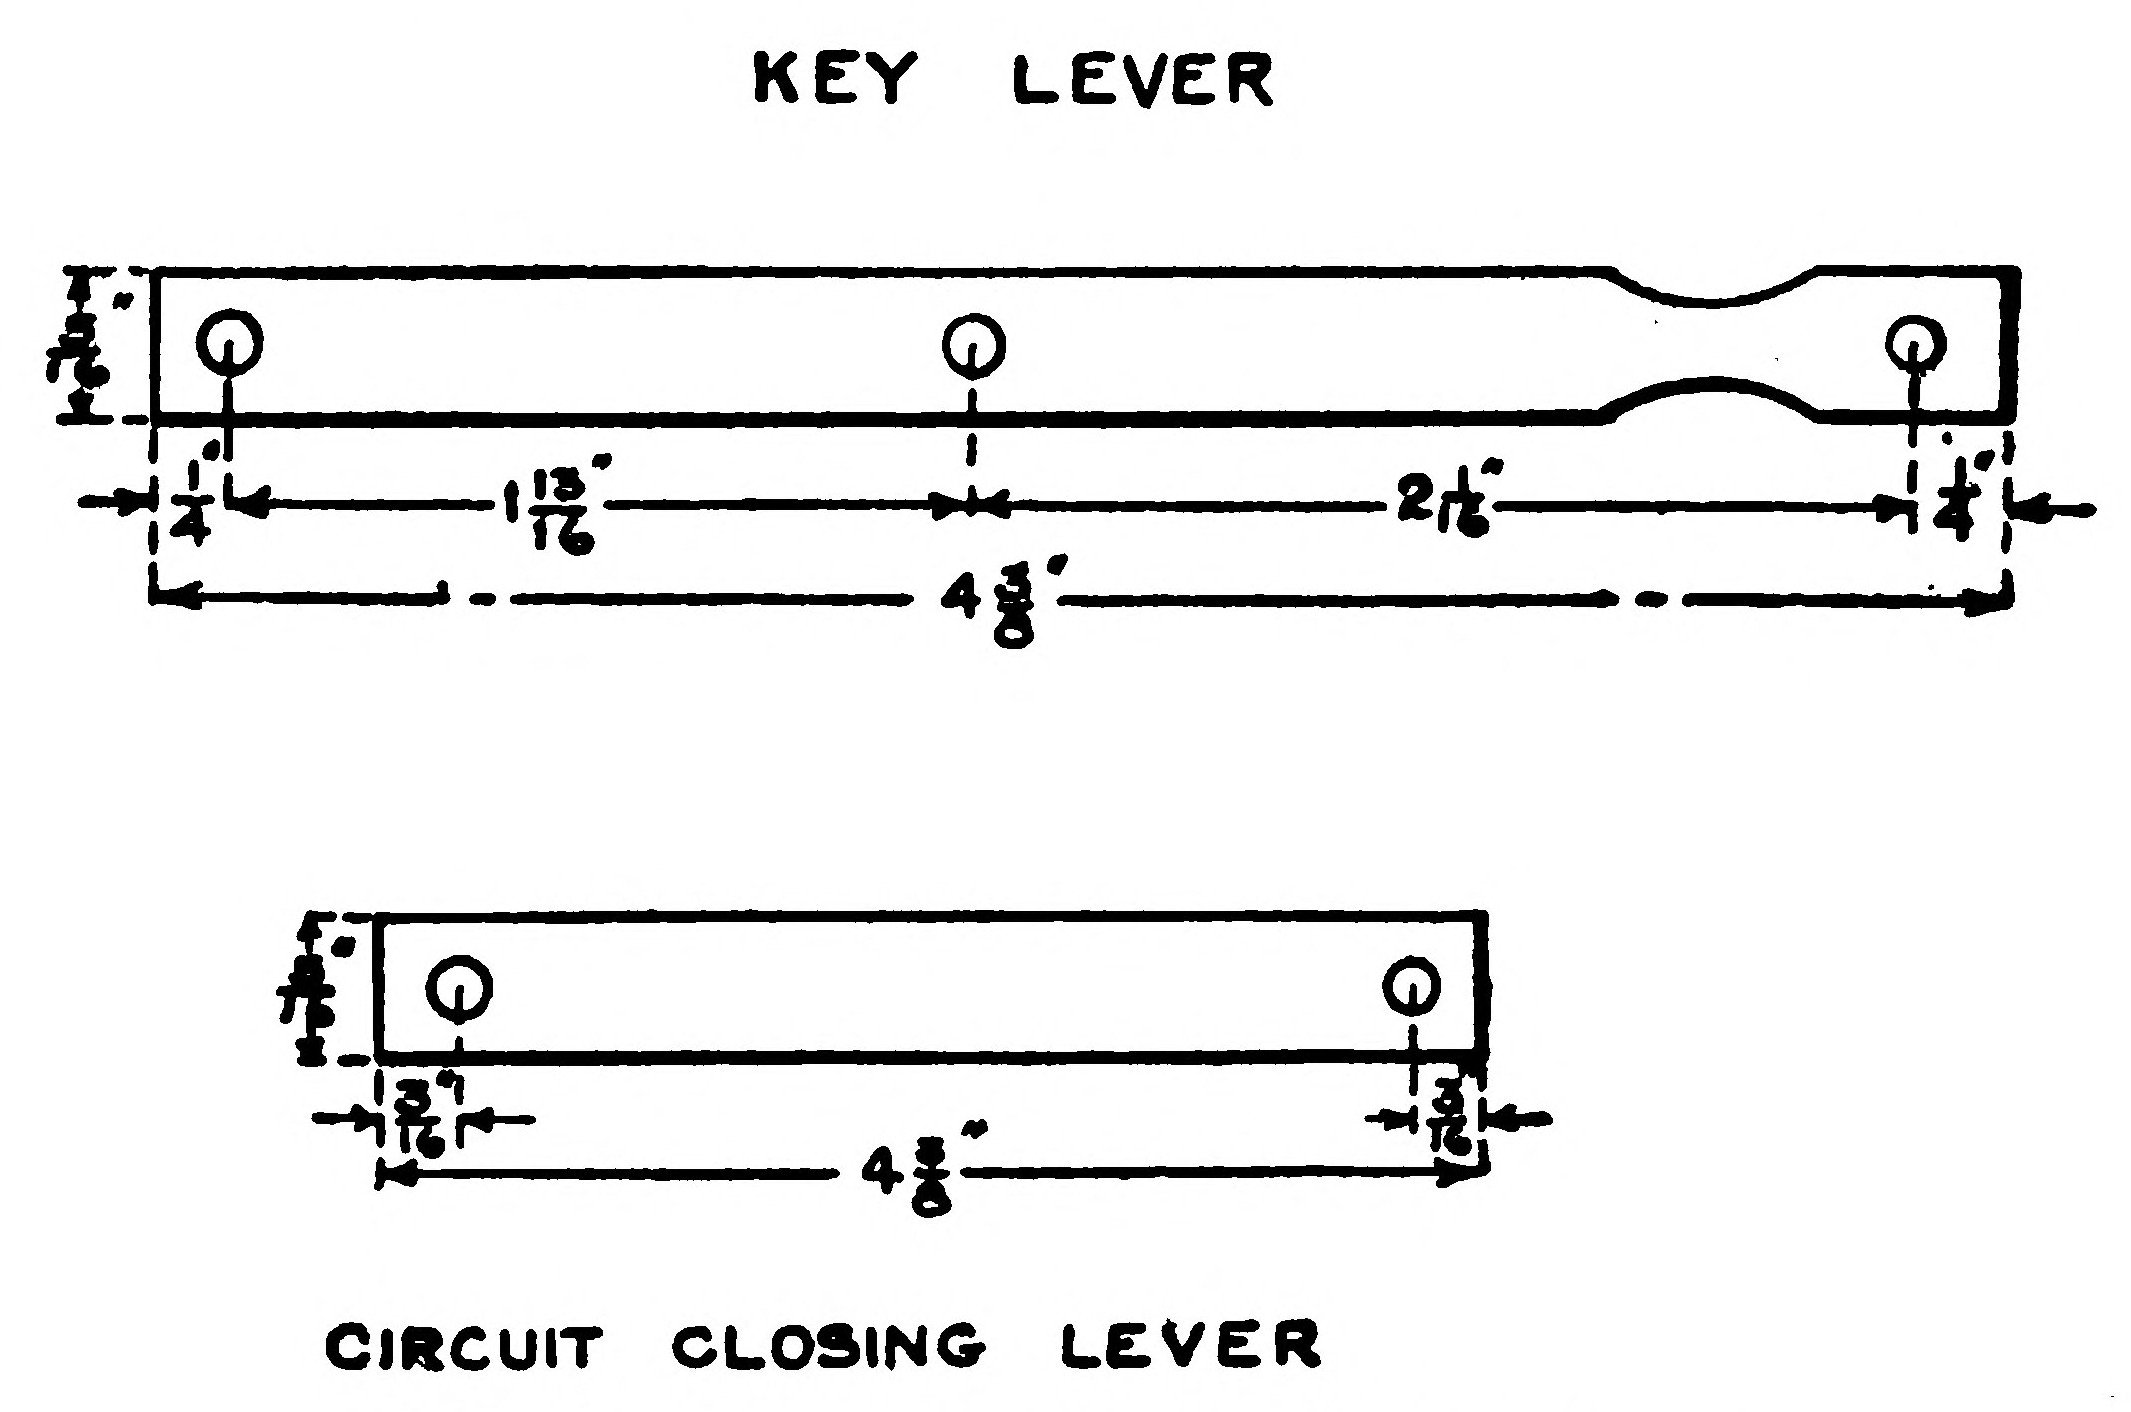 FIG. 90.—Key and Circuit Closing Levers.